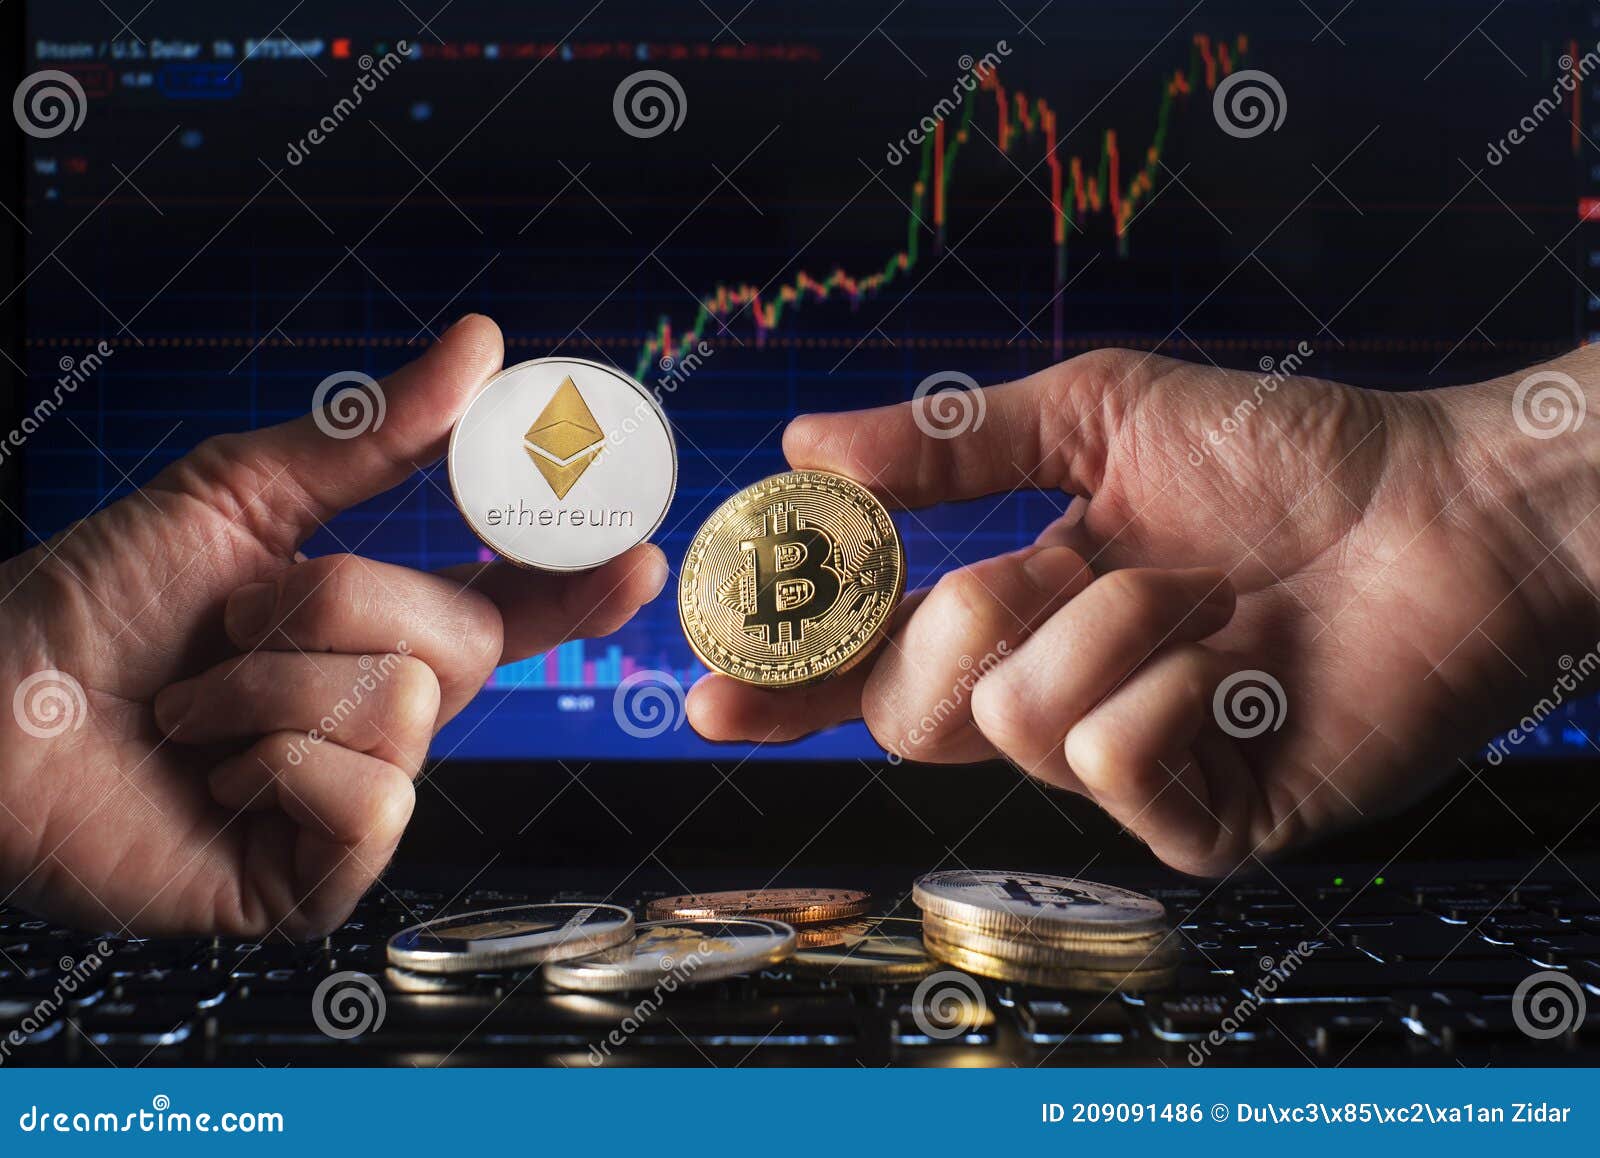 102 552 Cryptocurrency Photos Free Royalty Free Stock Photos From Dreamstime